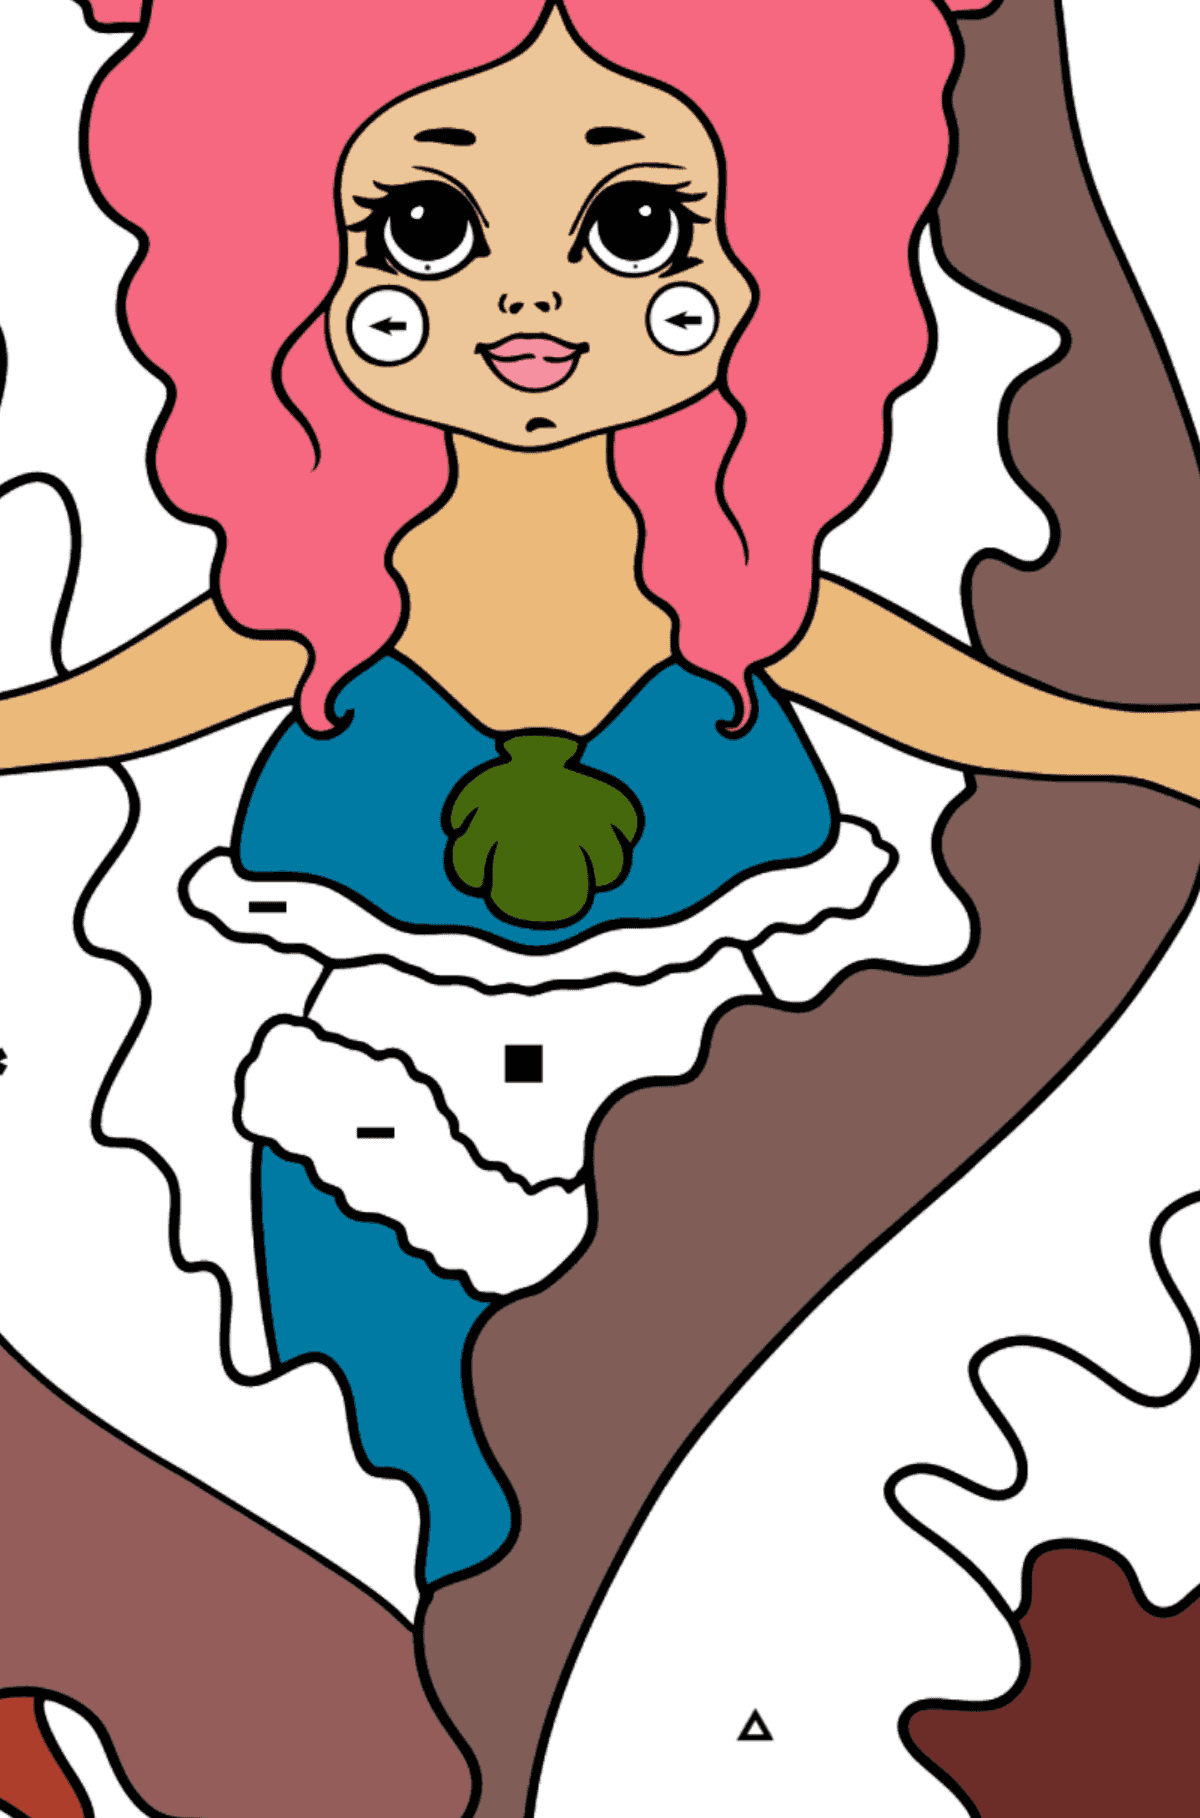 Mermaid and Red Algae coloring page - Coloring by Symbols for Kids